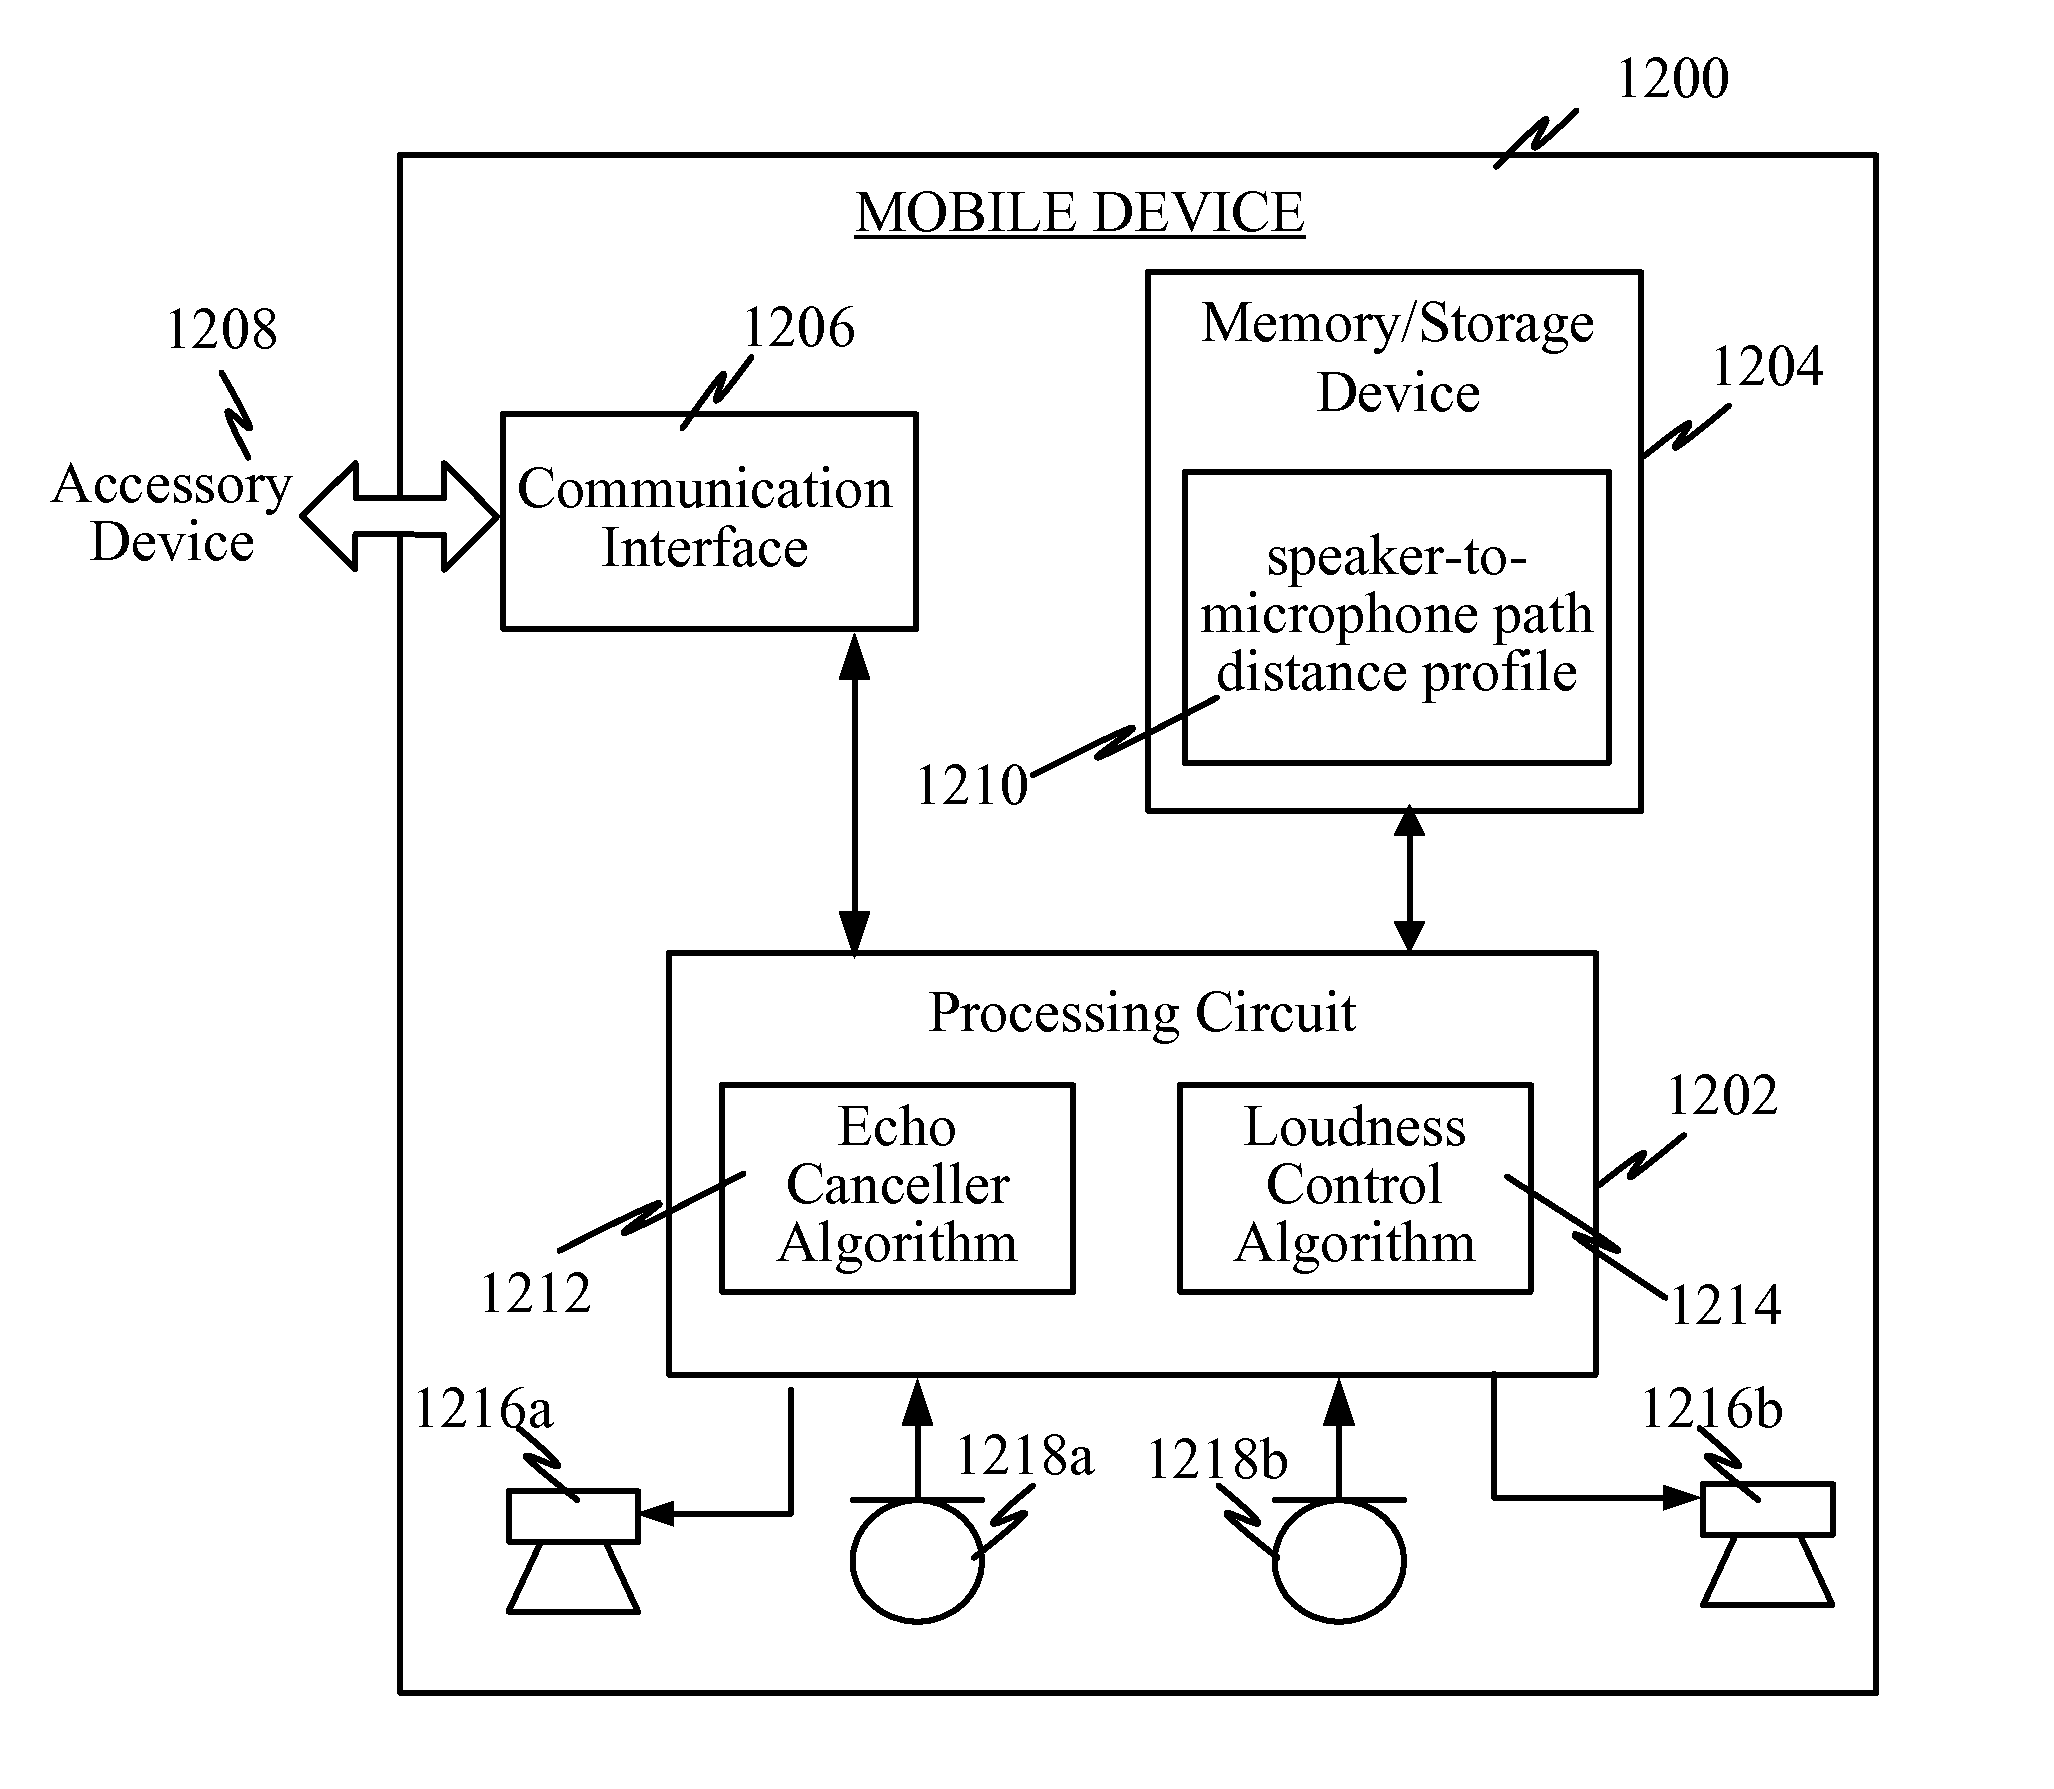 Optimizing audio processing functions by dynamically compensating for variable distances between speaker(s) and microphone(s) in a mobile device